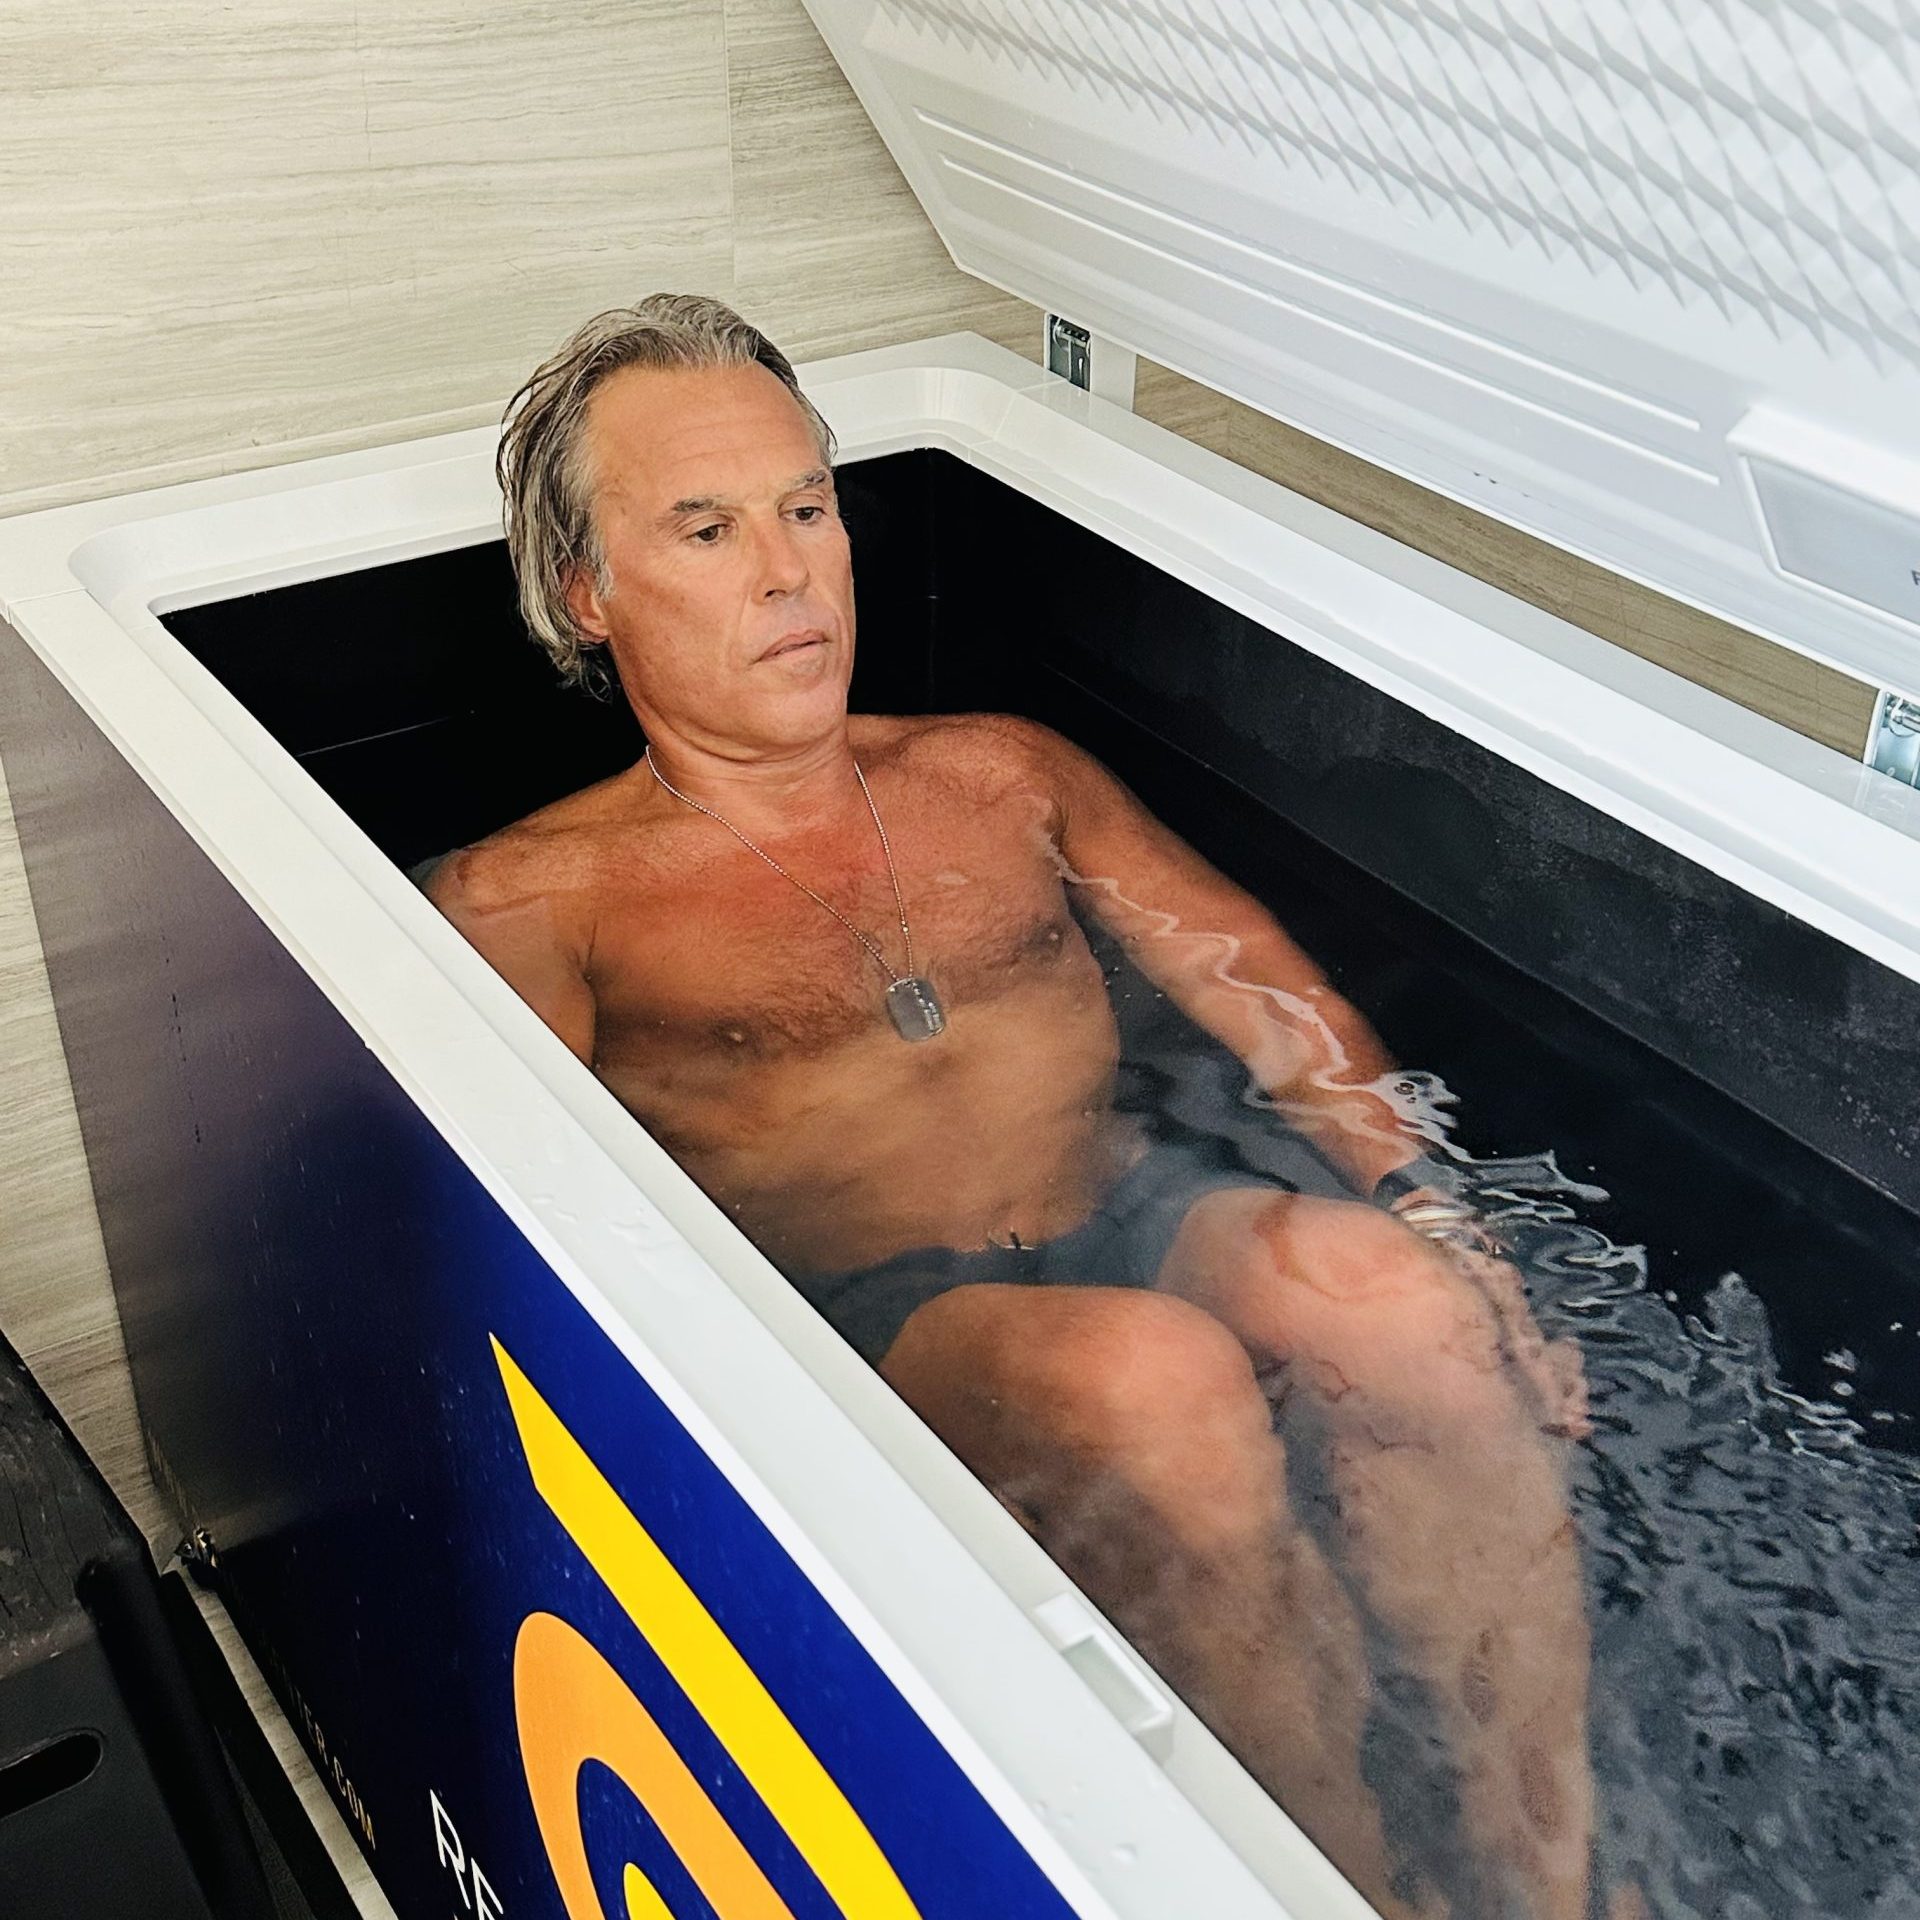 Cold plunge therapy involves immersing the body in cold water for brief periods, offering benefits like reduced inflammation, improved circulation, and enhanced muscle recovery.